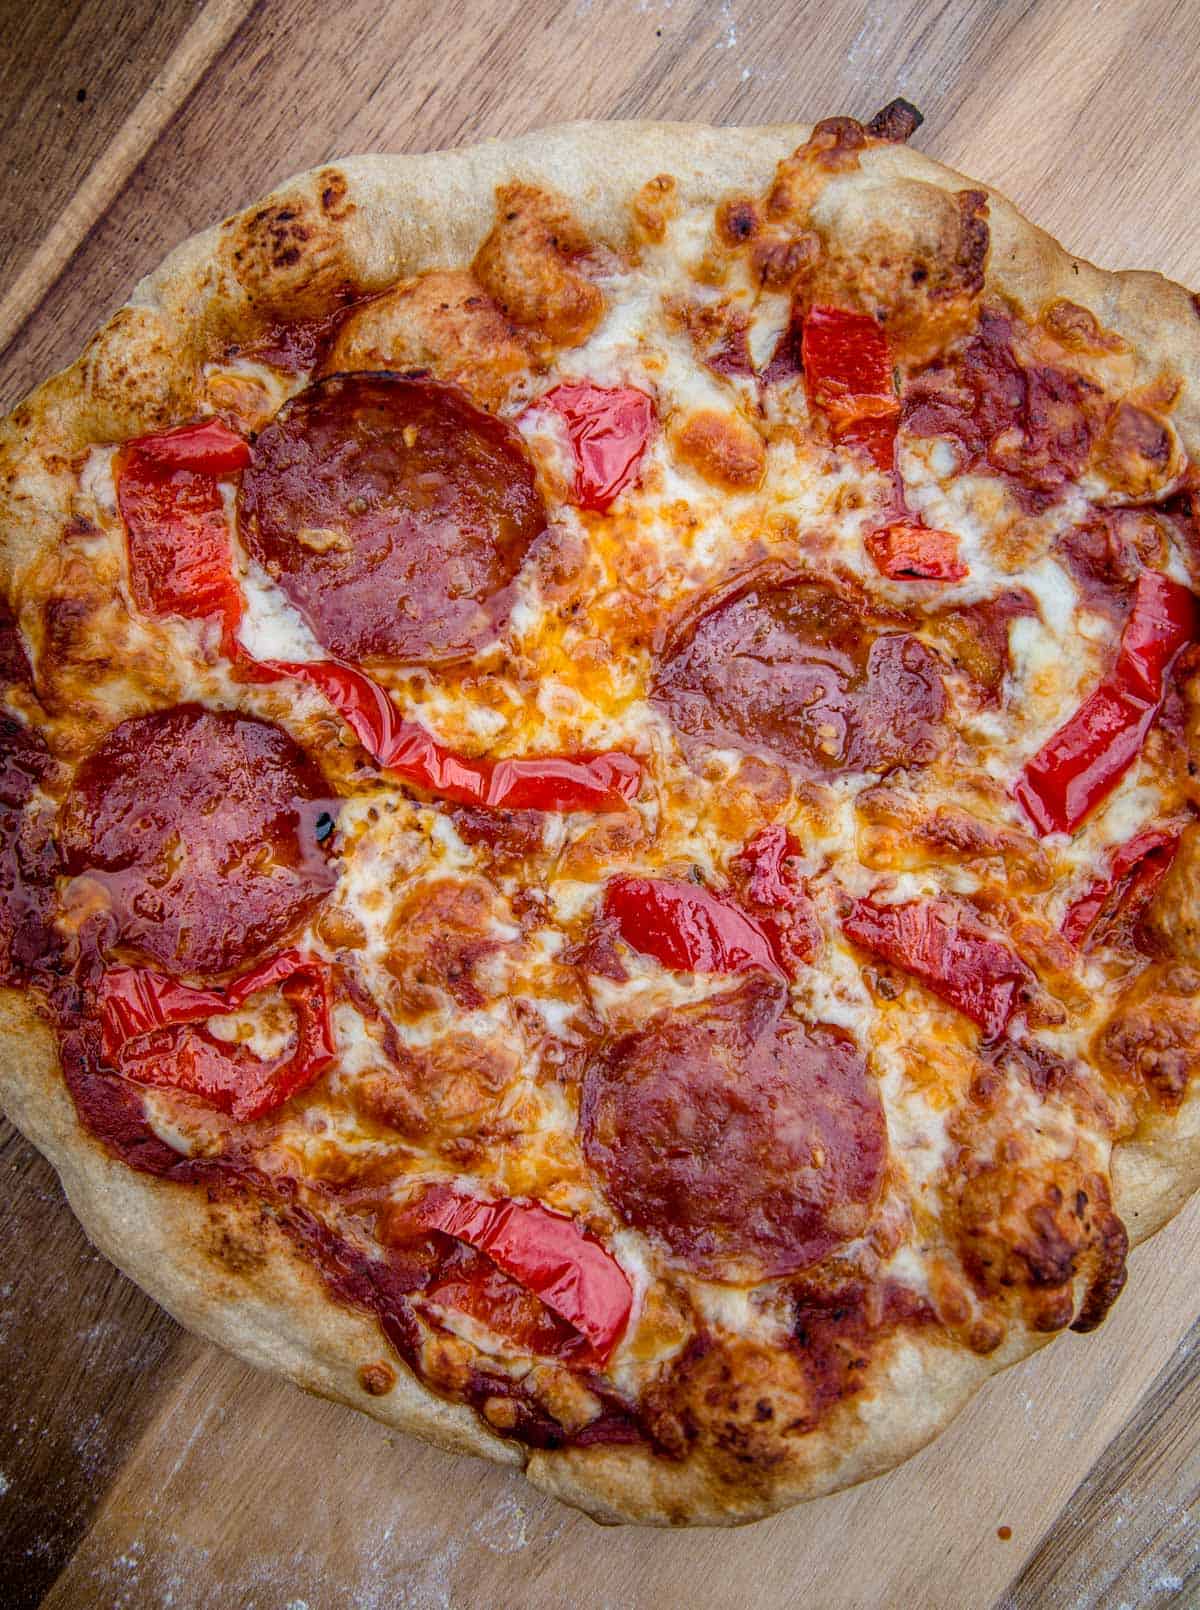 A pepperoni and hot pepper pizza that was cooked on the grill